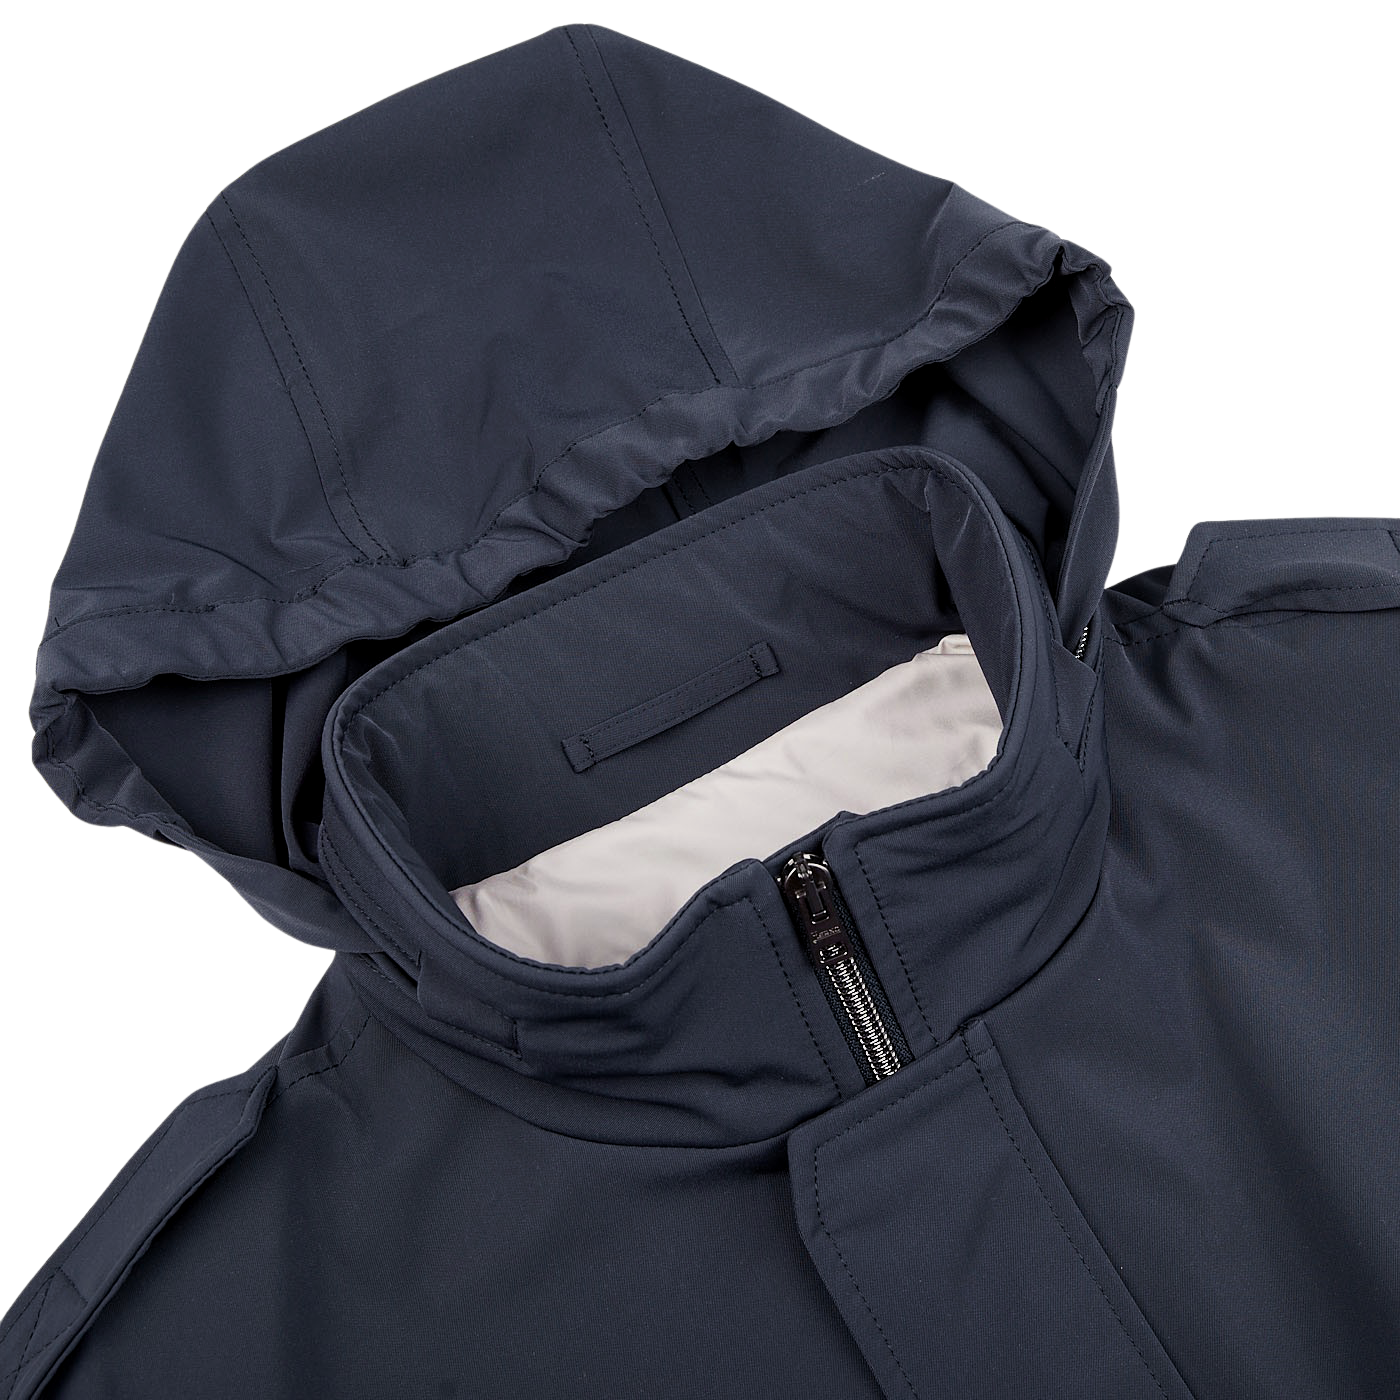 The Herno navy blue nylon hood field jacket features a zipper on its hood, making it a stylish and water-resistant option.